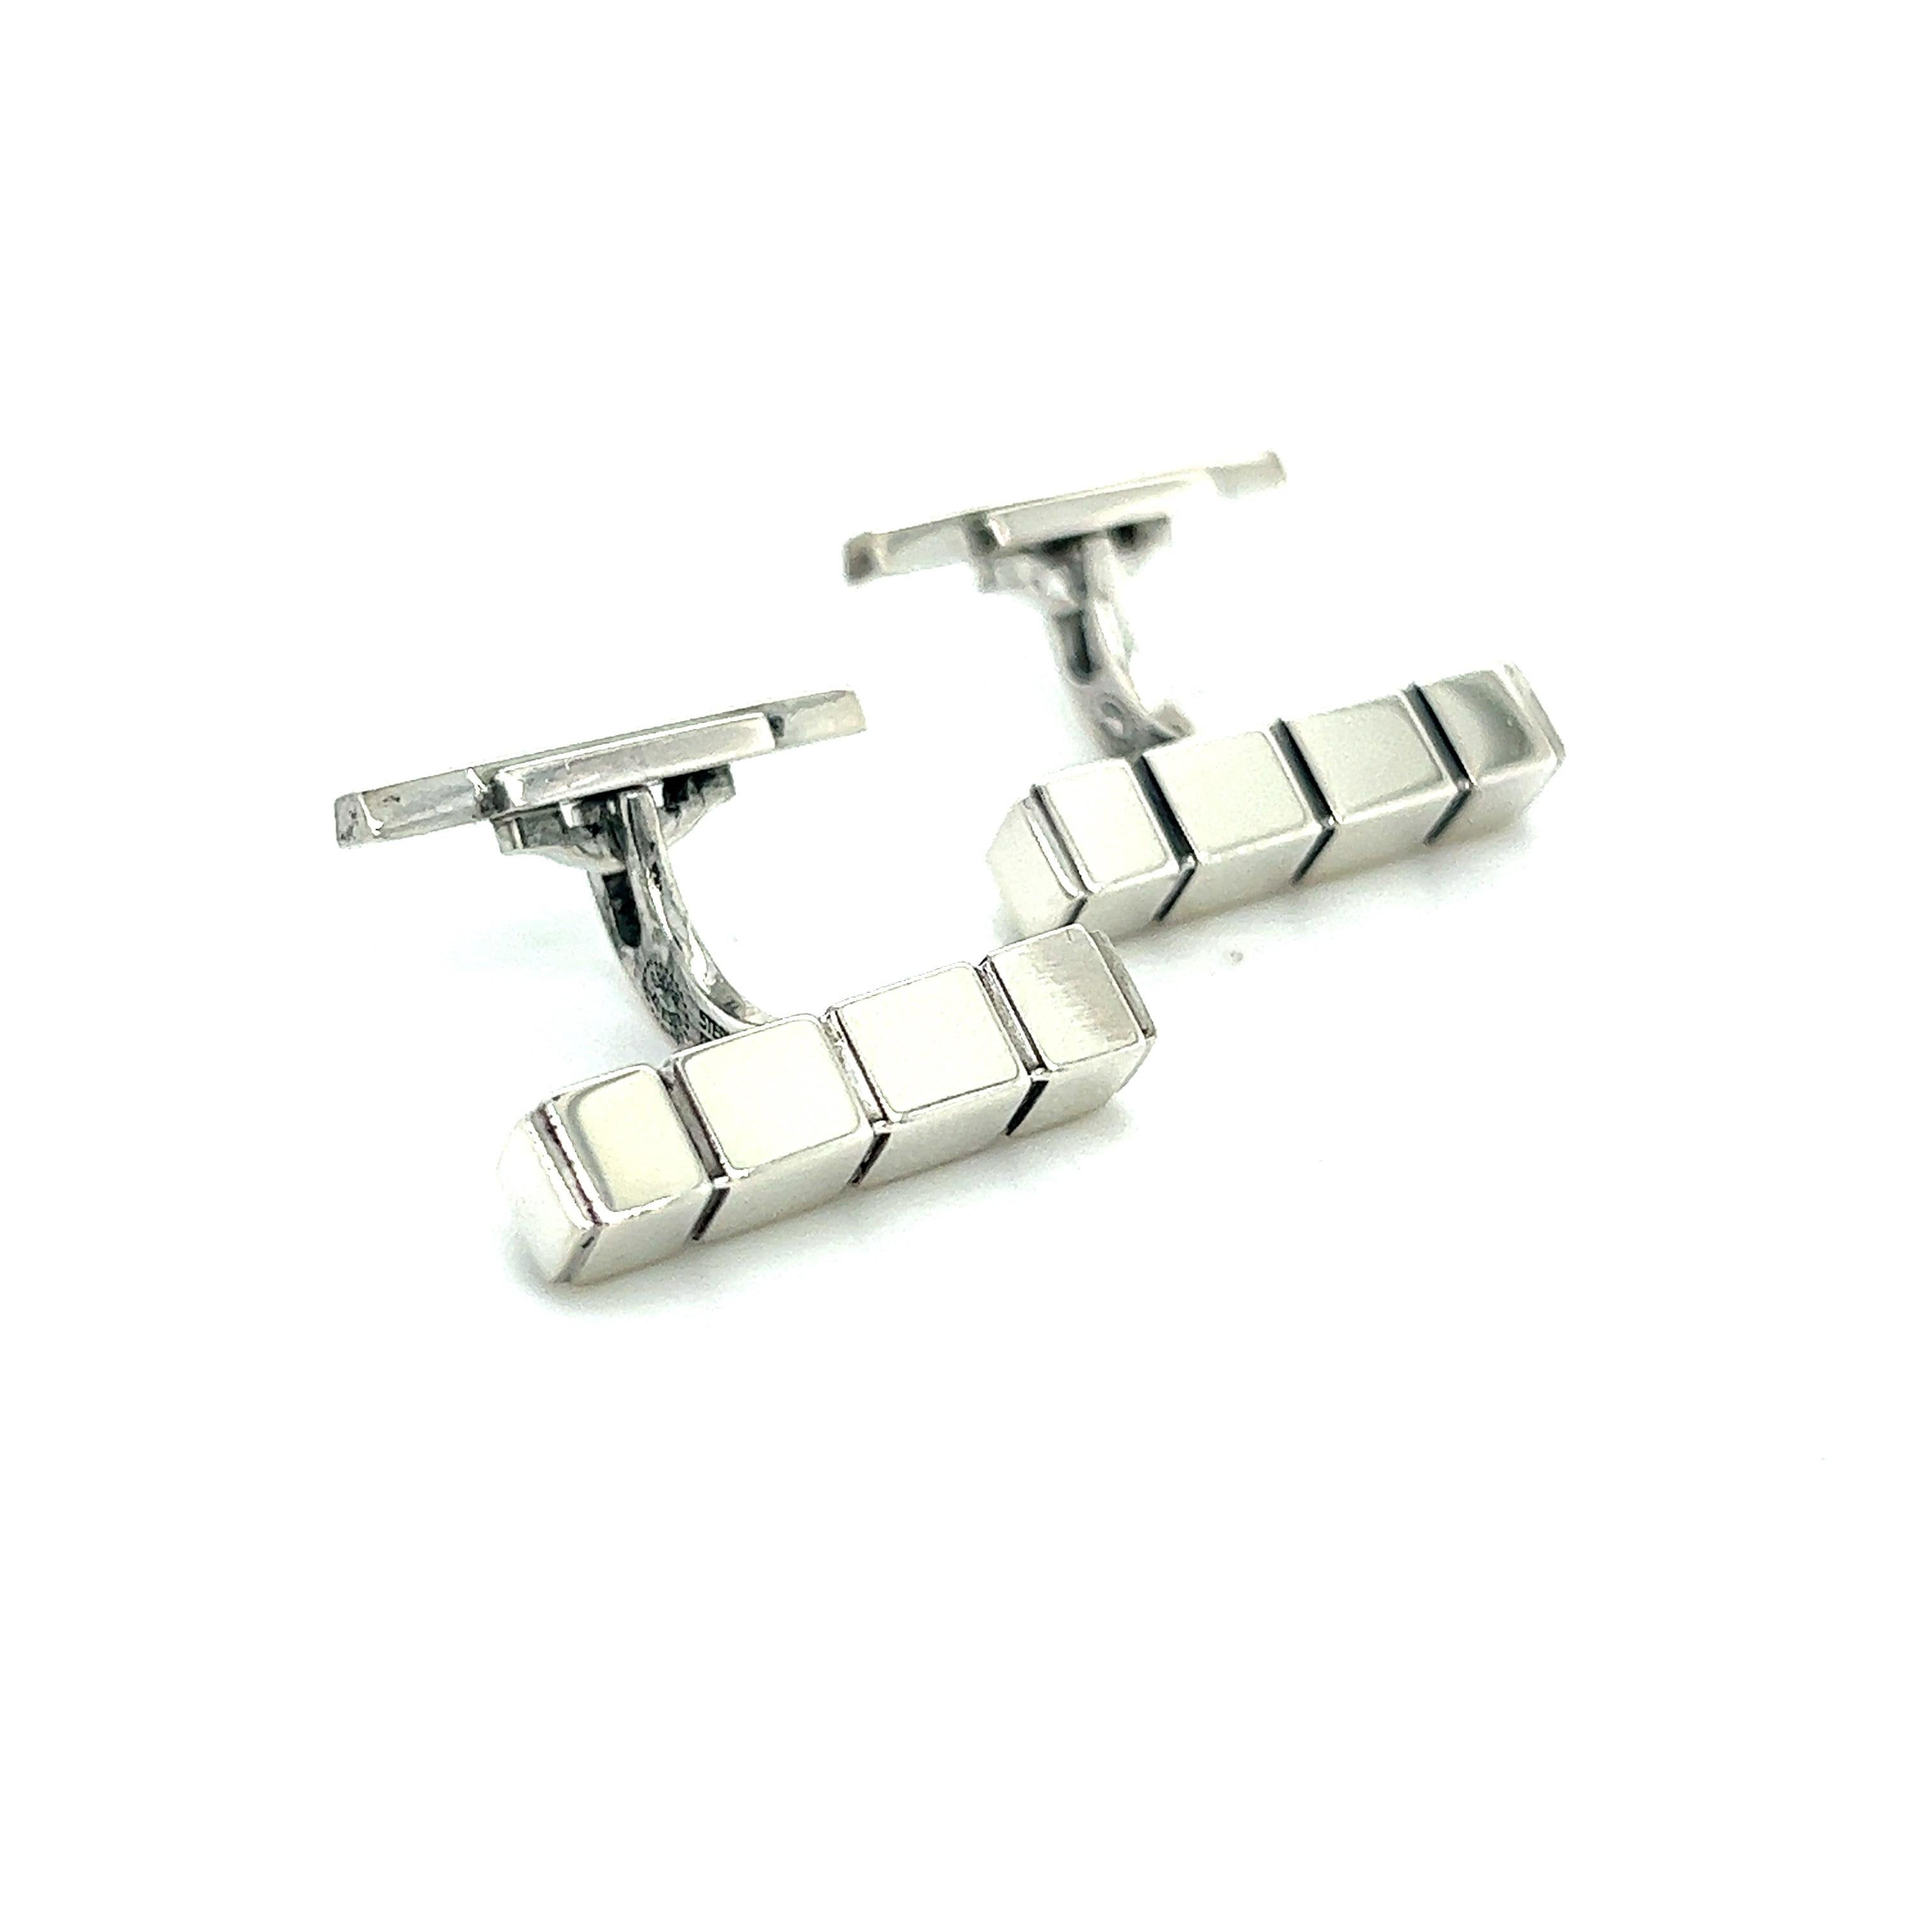 Georg Jensen Estate Mens Cufflinks Silver GJ17

These elegant Authentic Georg Jensen Men's Cufflinks are made of sterling silver and have a weight of 15 grams.

TRUSTED SELLER SINCE 2002

PLEASE SEE OUR HUNDREDS OF POSITIVE FEEDBACKS FROM OUR